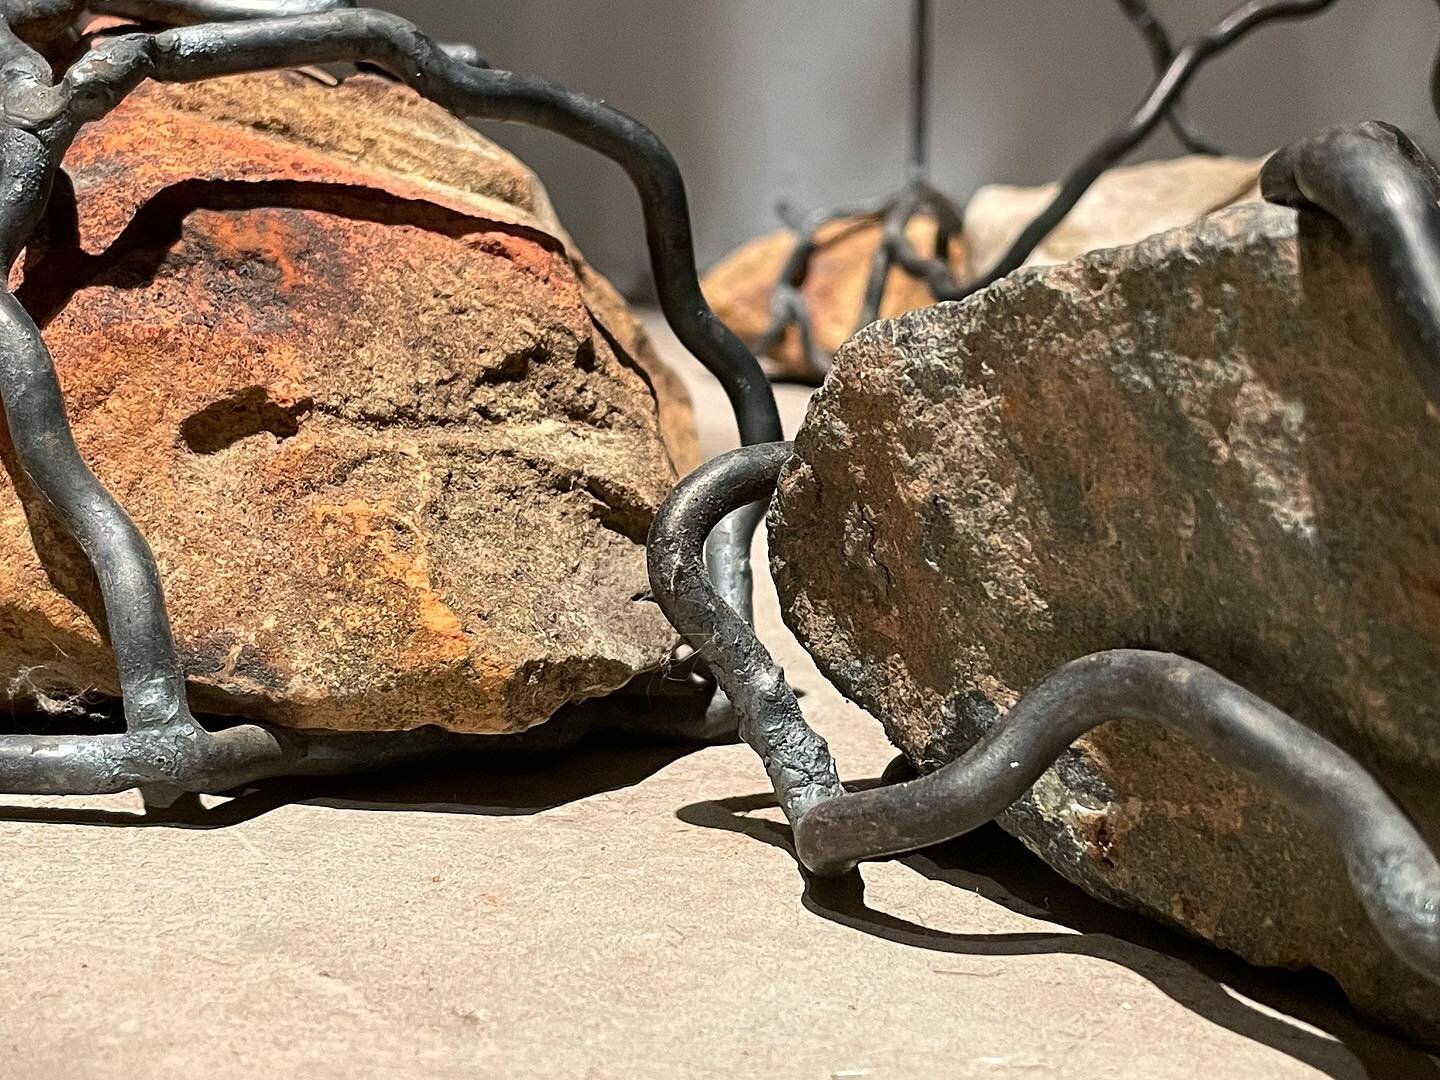 Detail shot of &ldquo;Locus&rdquo; by Ayla Gizlice @ayla_k_g, currently featured in &ldquo;Limestone Almanac.&rdquo; Rocks and plastic gathered from feeder streams to Jordan Lake, steel. 
⠀⠀⠀⠀⠀⠀⠀⠀⠀
Ayla&rsquo;s work explores local and global environm